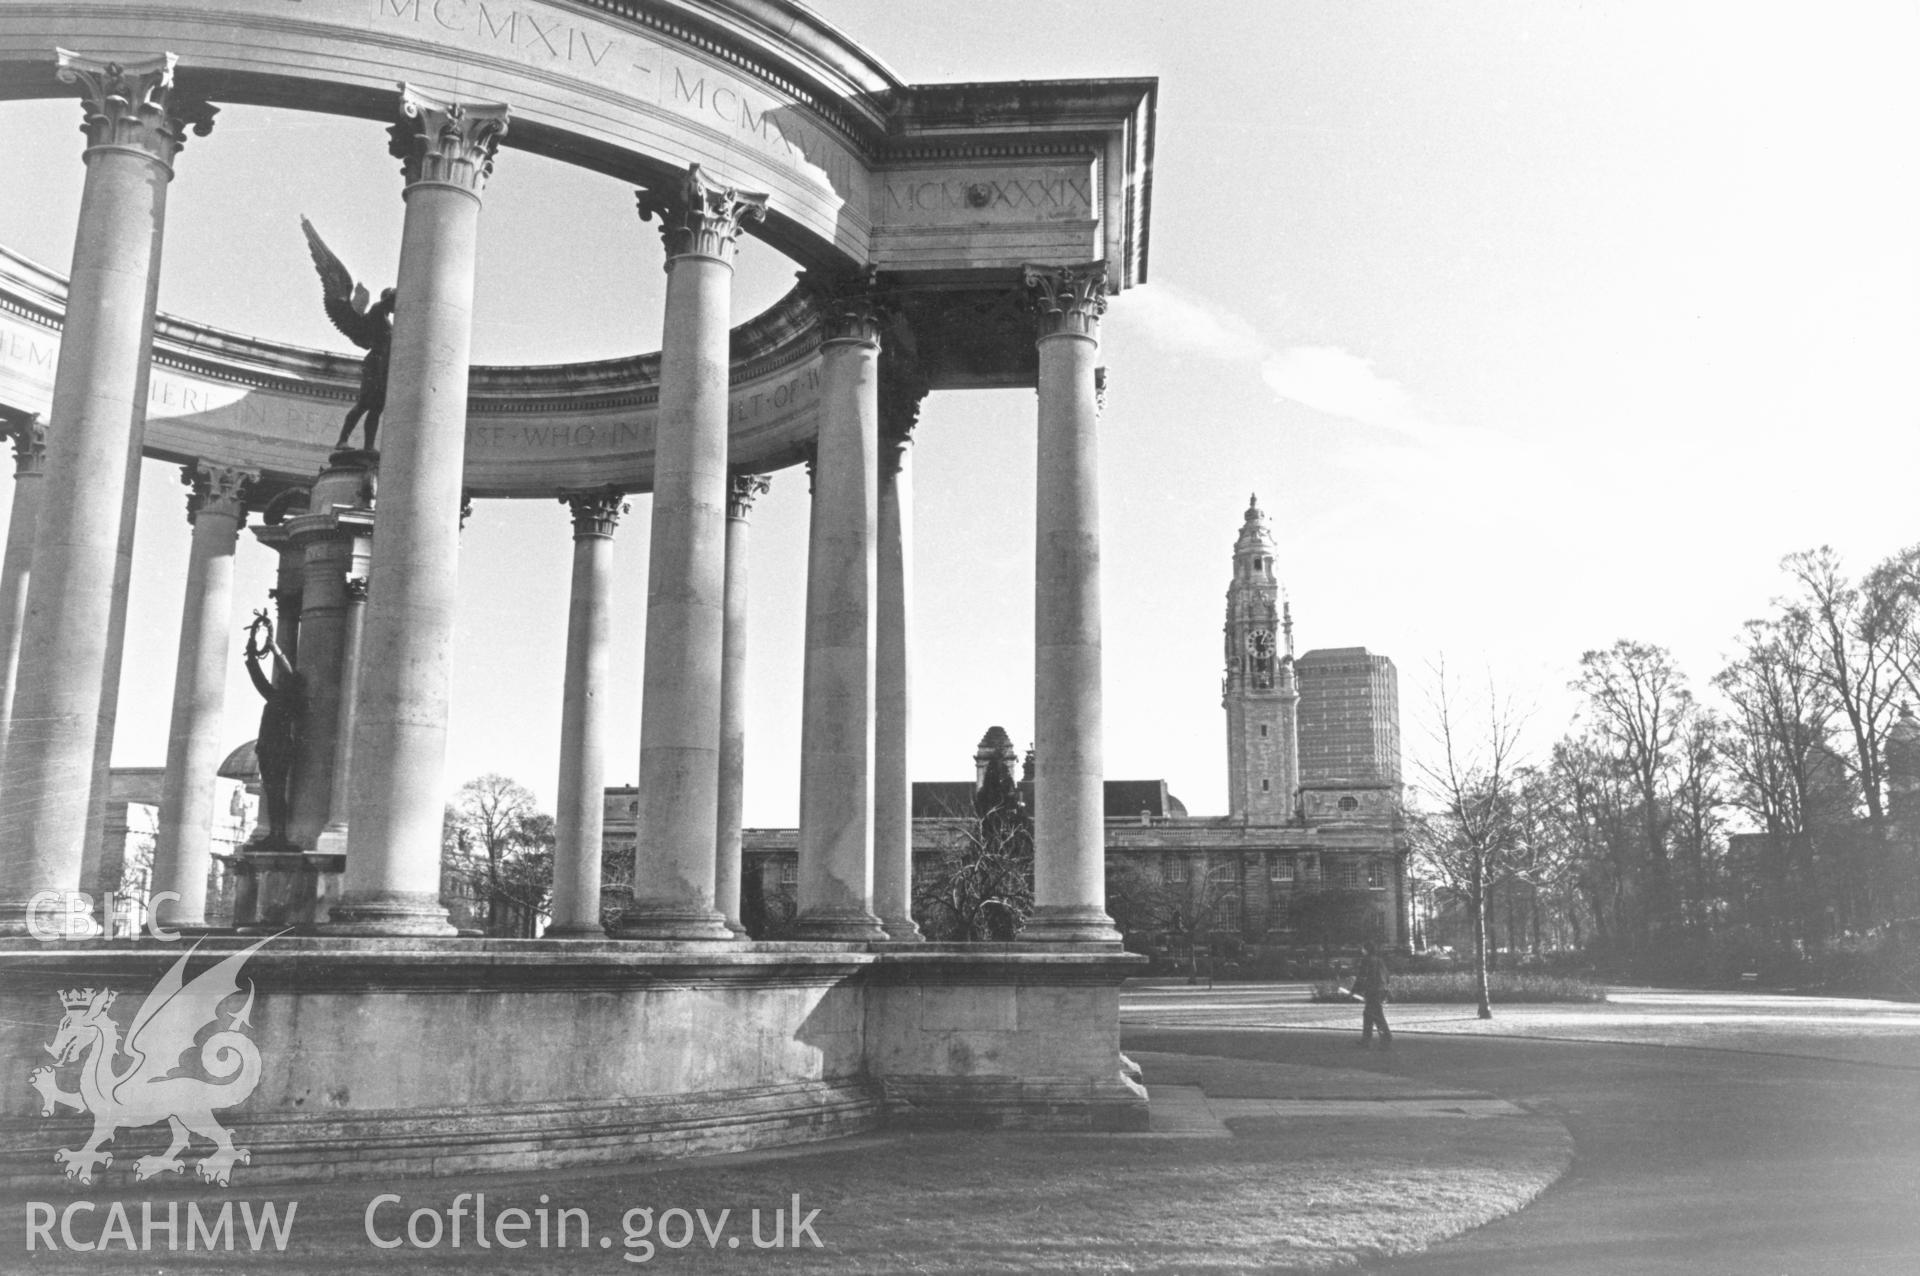 1 b/w print showing view of the War Memorial, Cathays Park, Cardiff; collated by the former Central Office of Information.